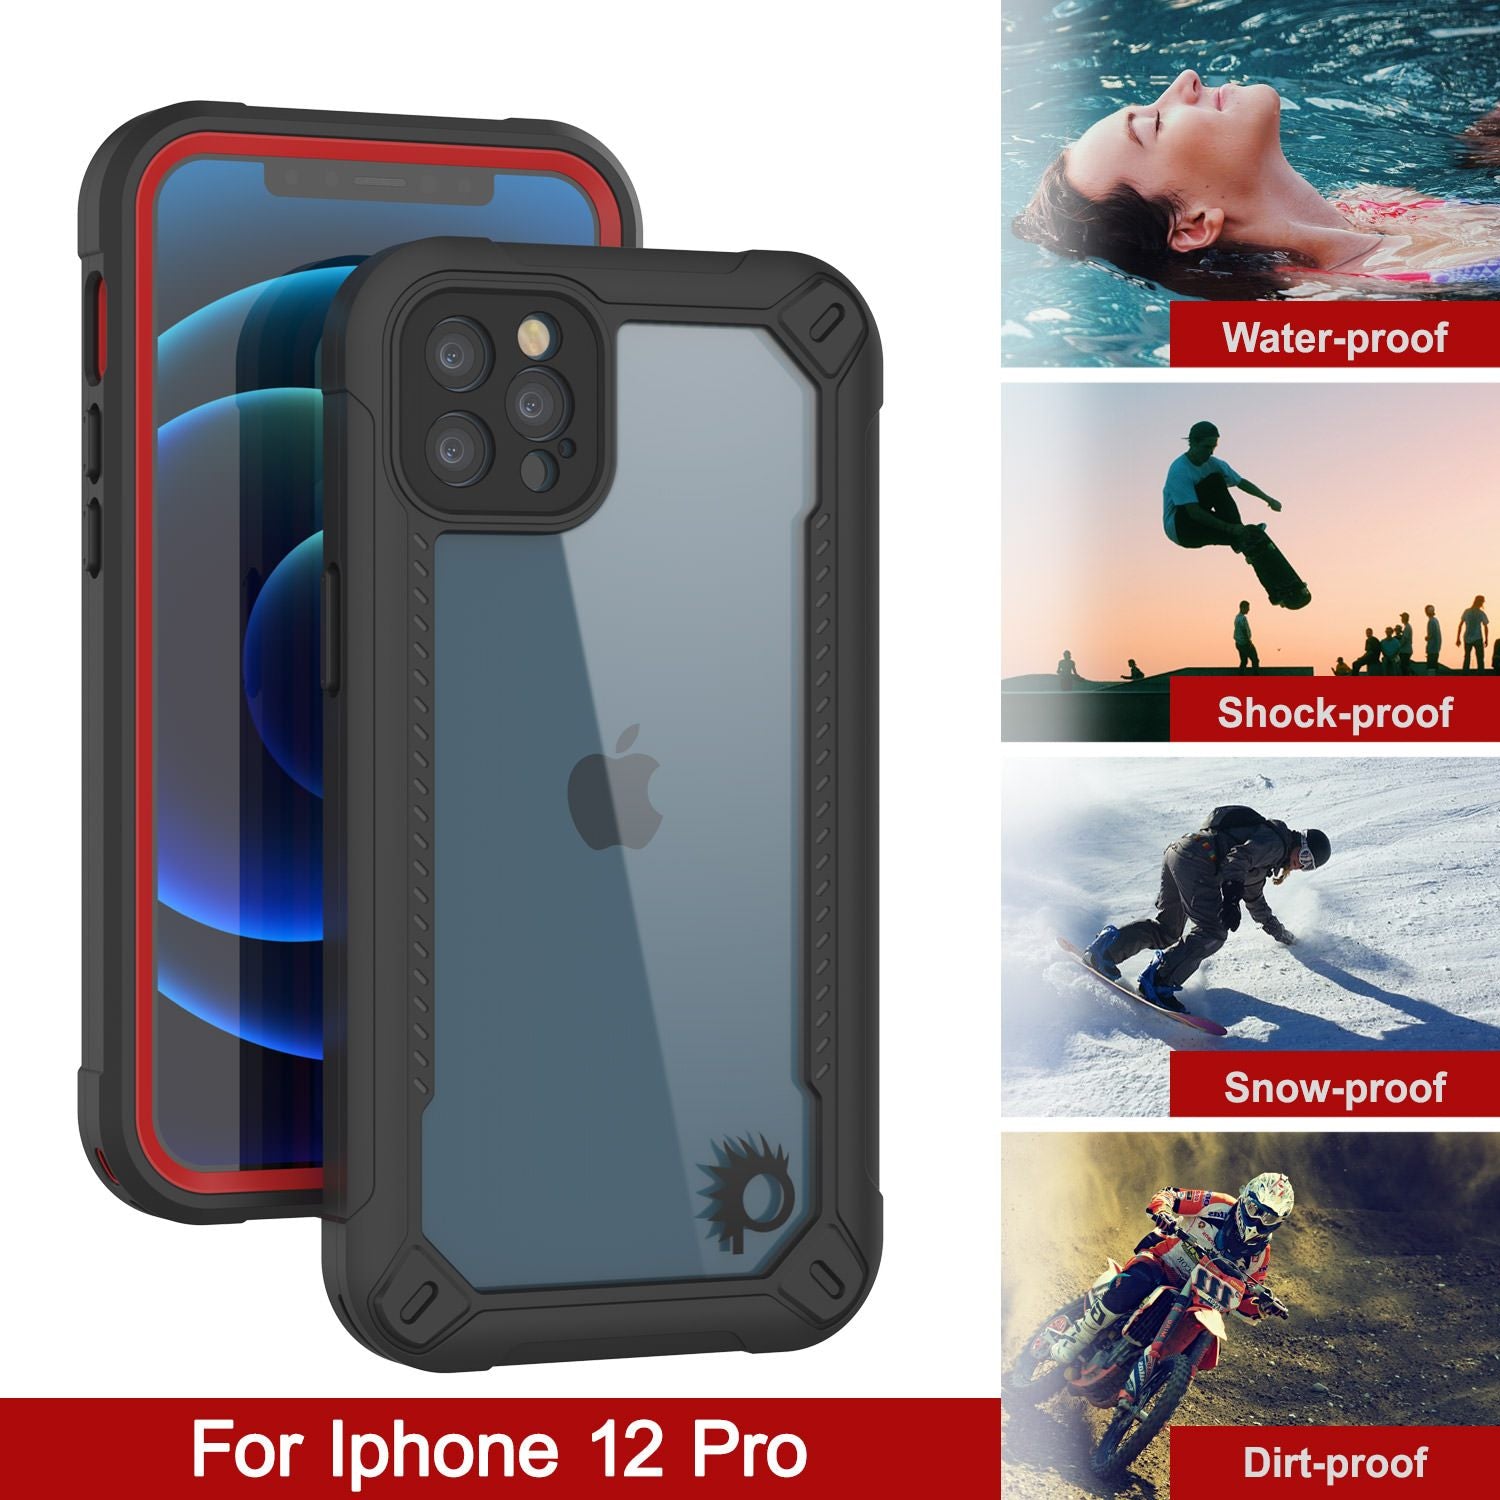 iPhone 12 Pro Waterproof IP68 Case, Punkcase [red]  [Maximus Series] [Slim Fit] [IP68 Certified] [Shockresistant] Clear Armor Cover with Screen Protector | Ultimate Protection